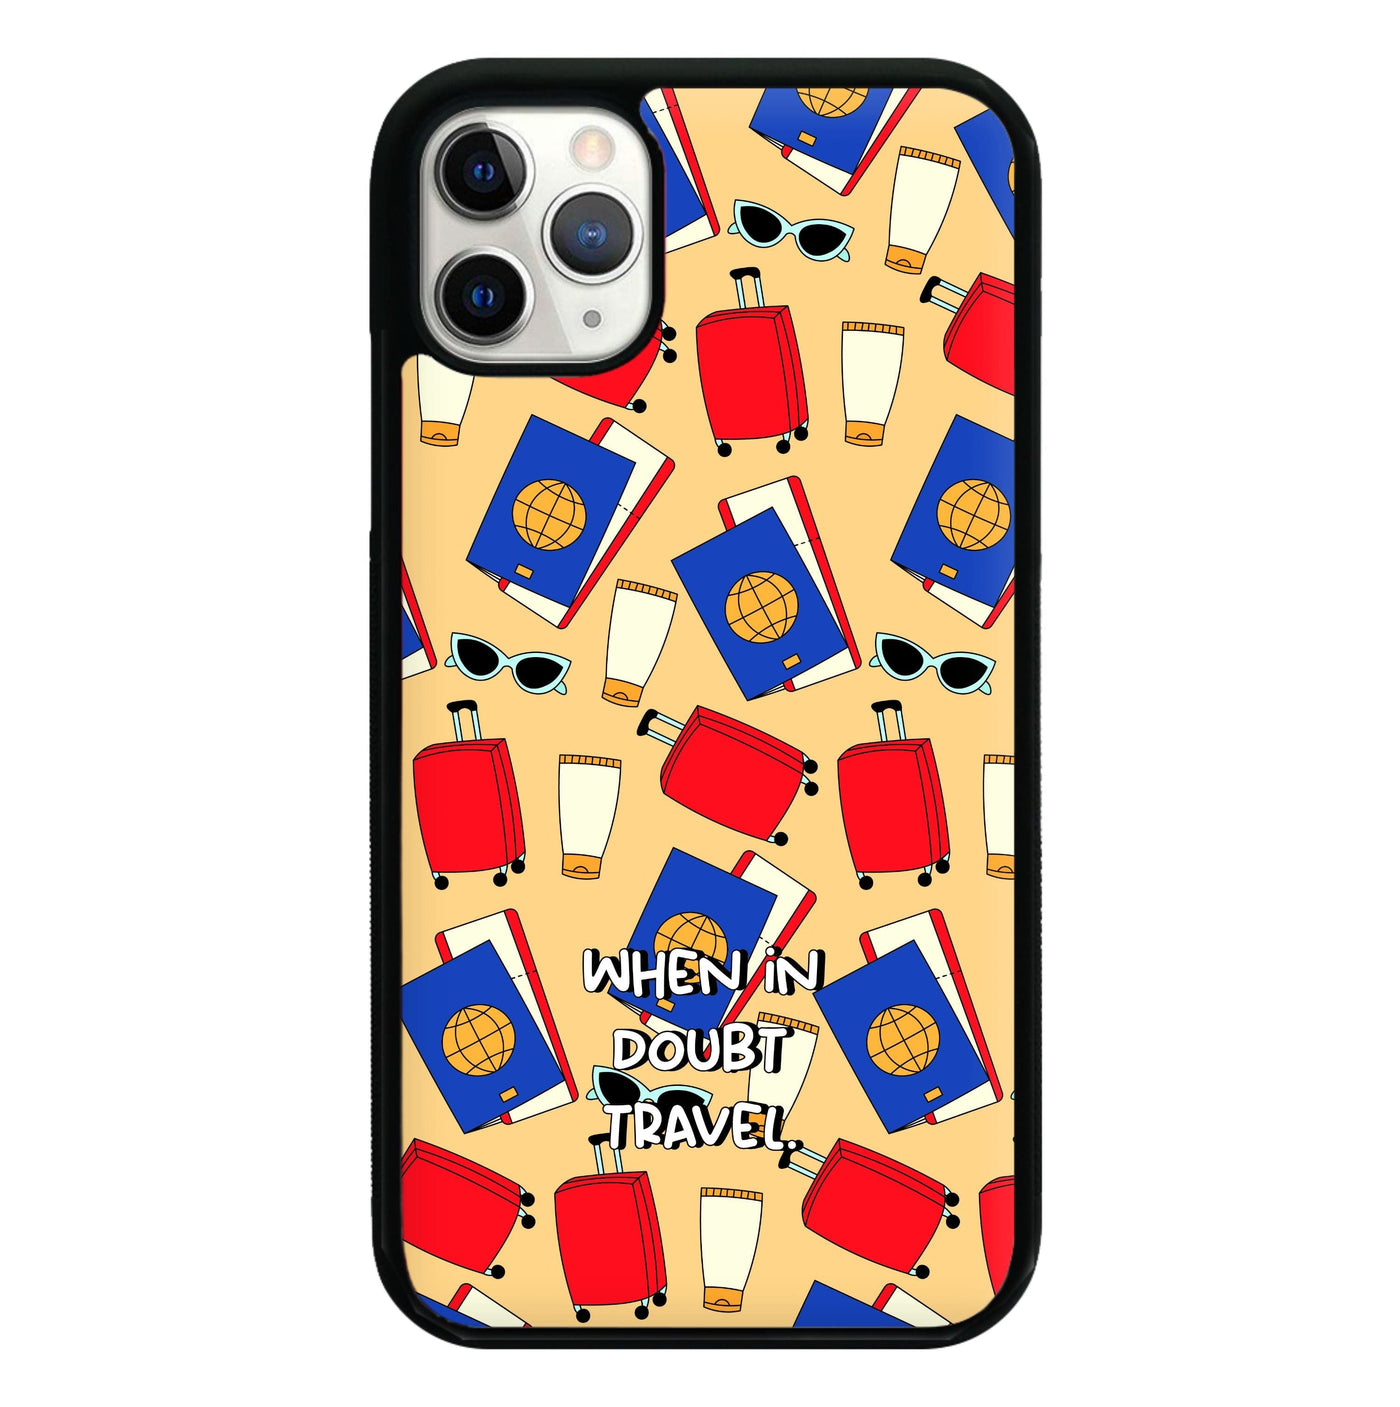 When In Doubt Travel - Travel Phone Case